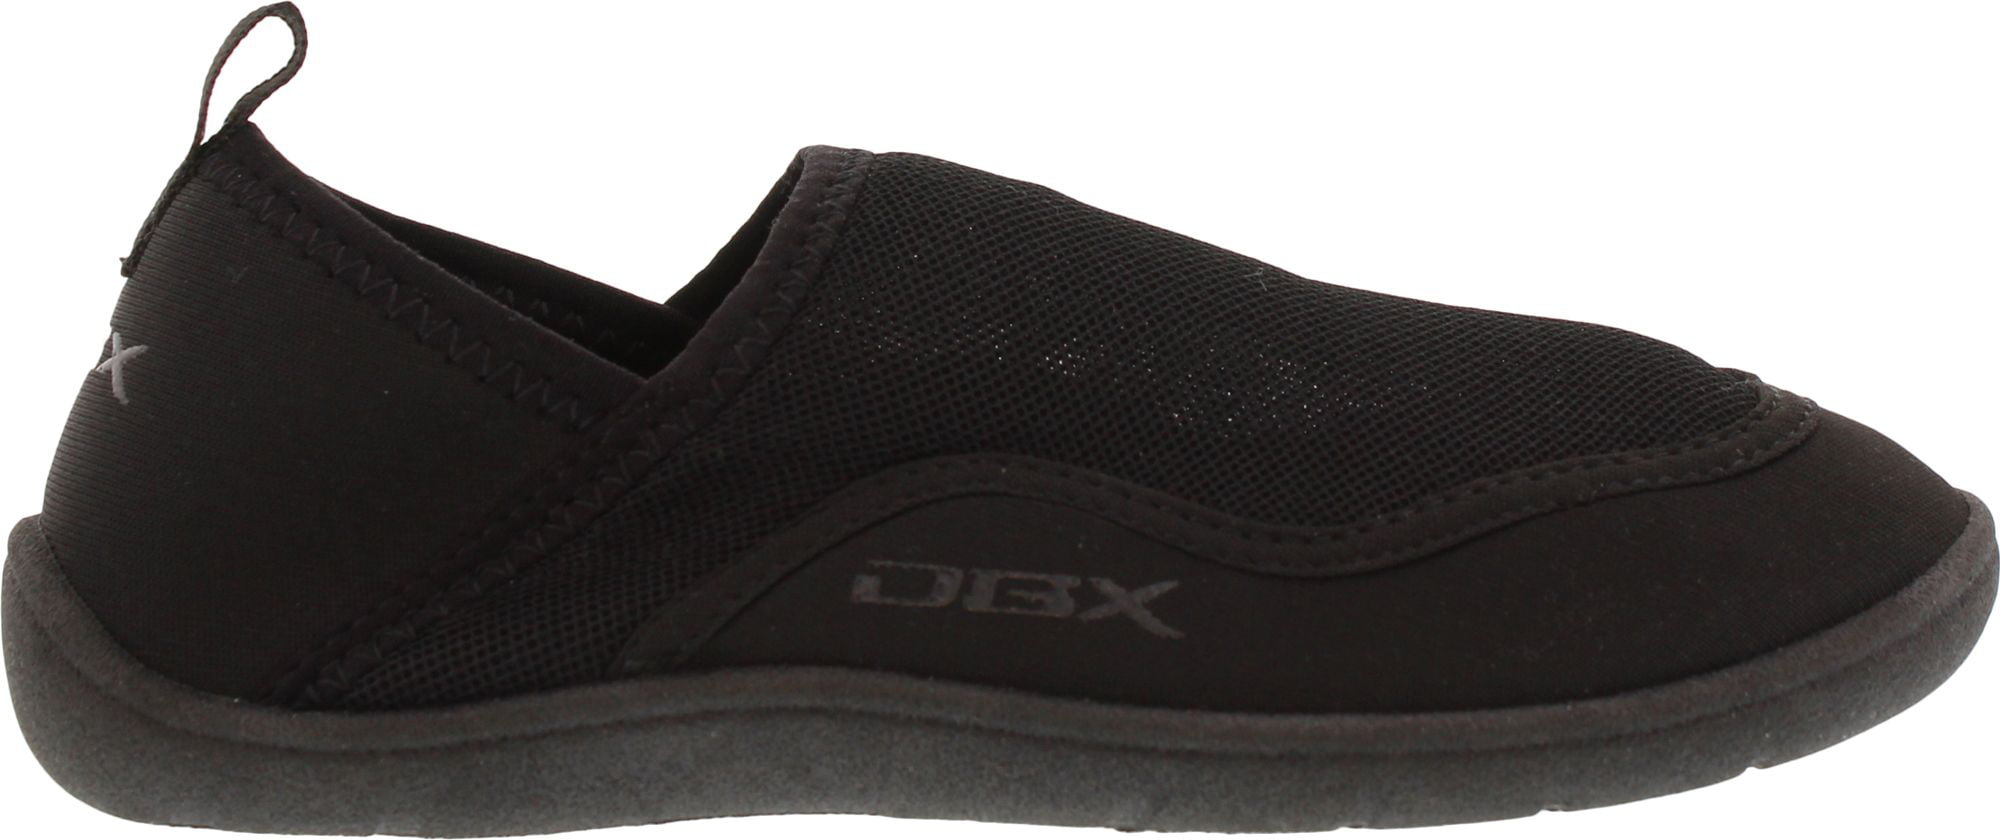 dbx water shoes